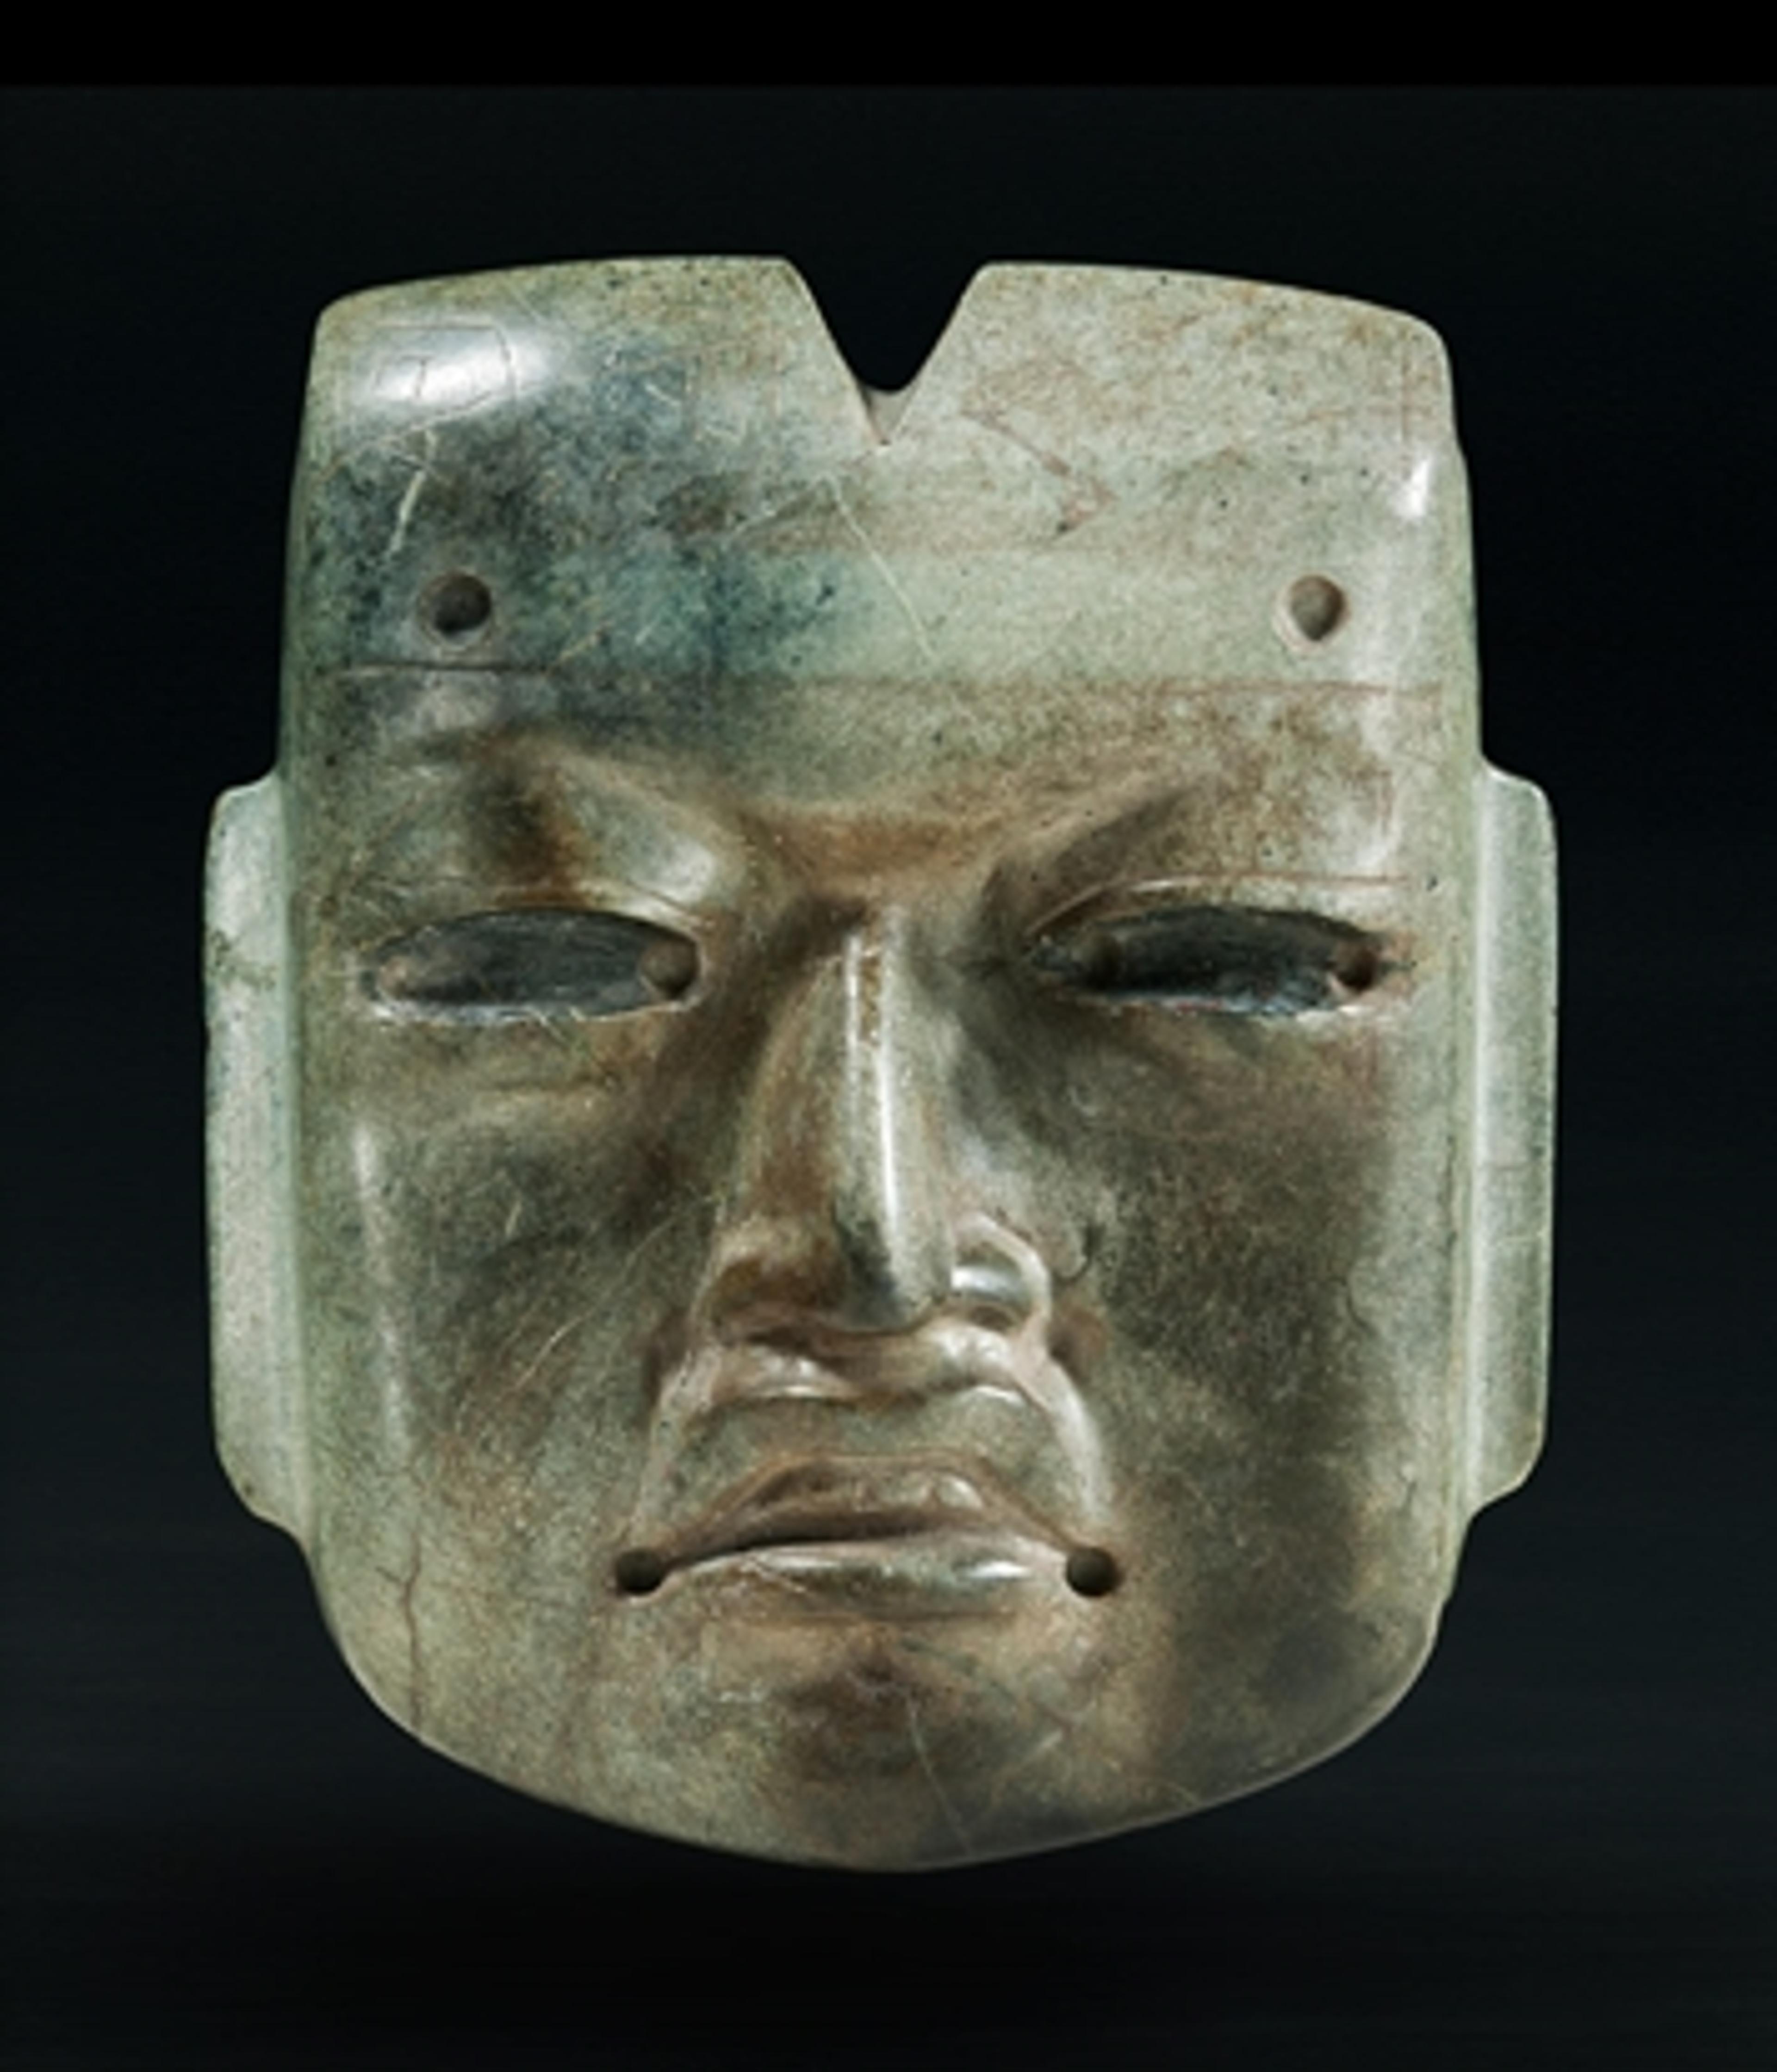 An ancient Olmec mask made of hornblende hornfels in the mid- to late 15th century